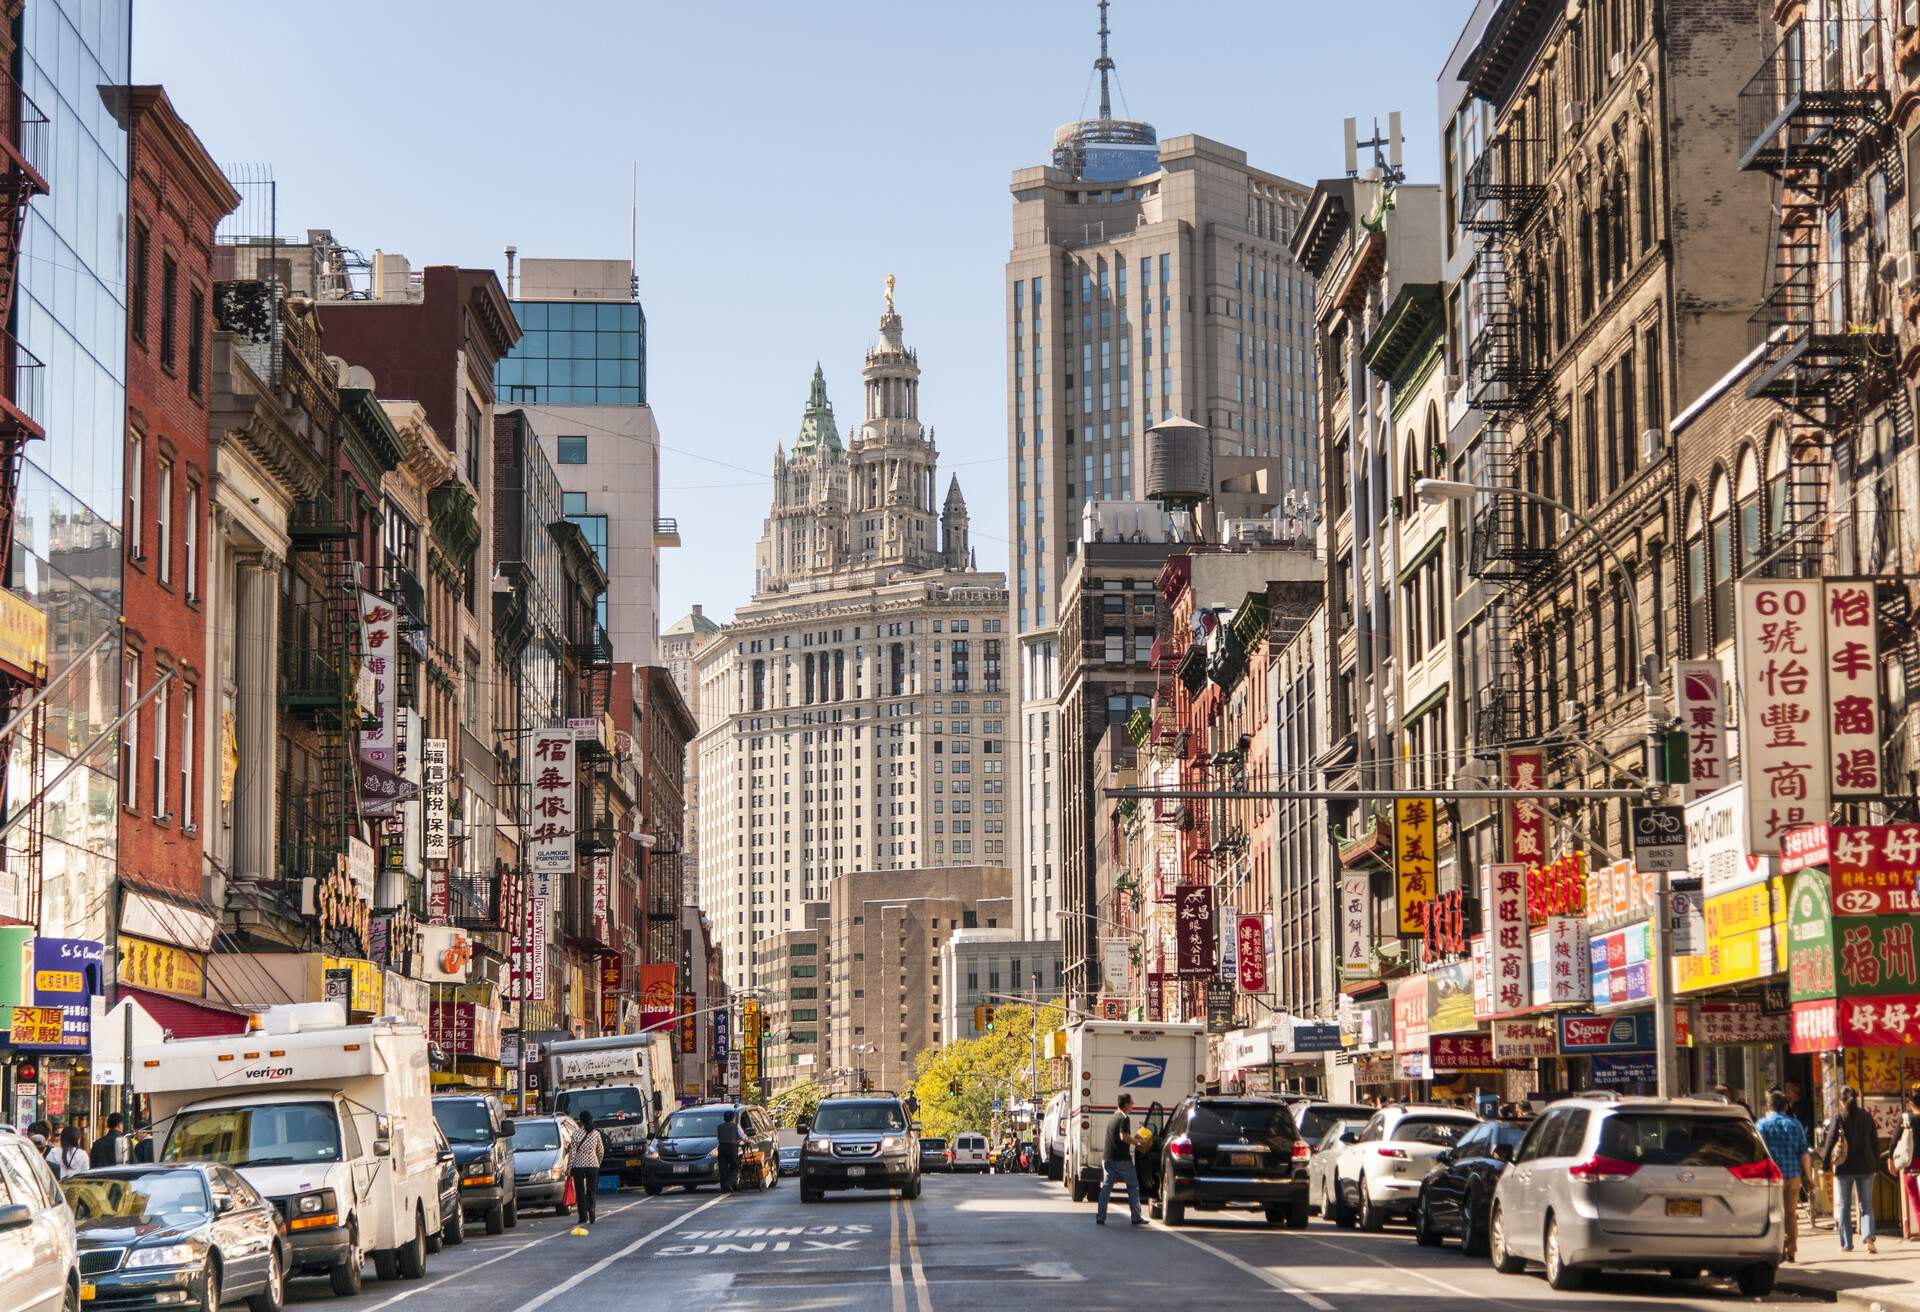 Chinatown, East Broadway. East Broadway is a two-way east-west street in the Chinatown, Two Bridges, and Lower East Side neighborhoods of the New York City borough of Manhattan